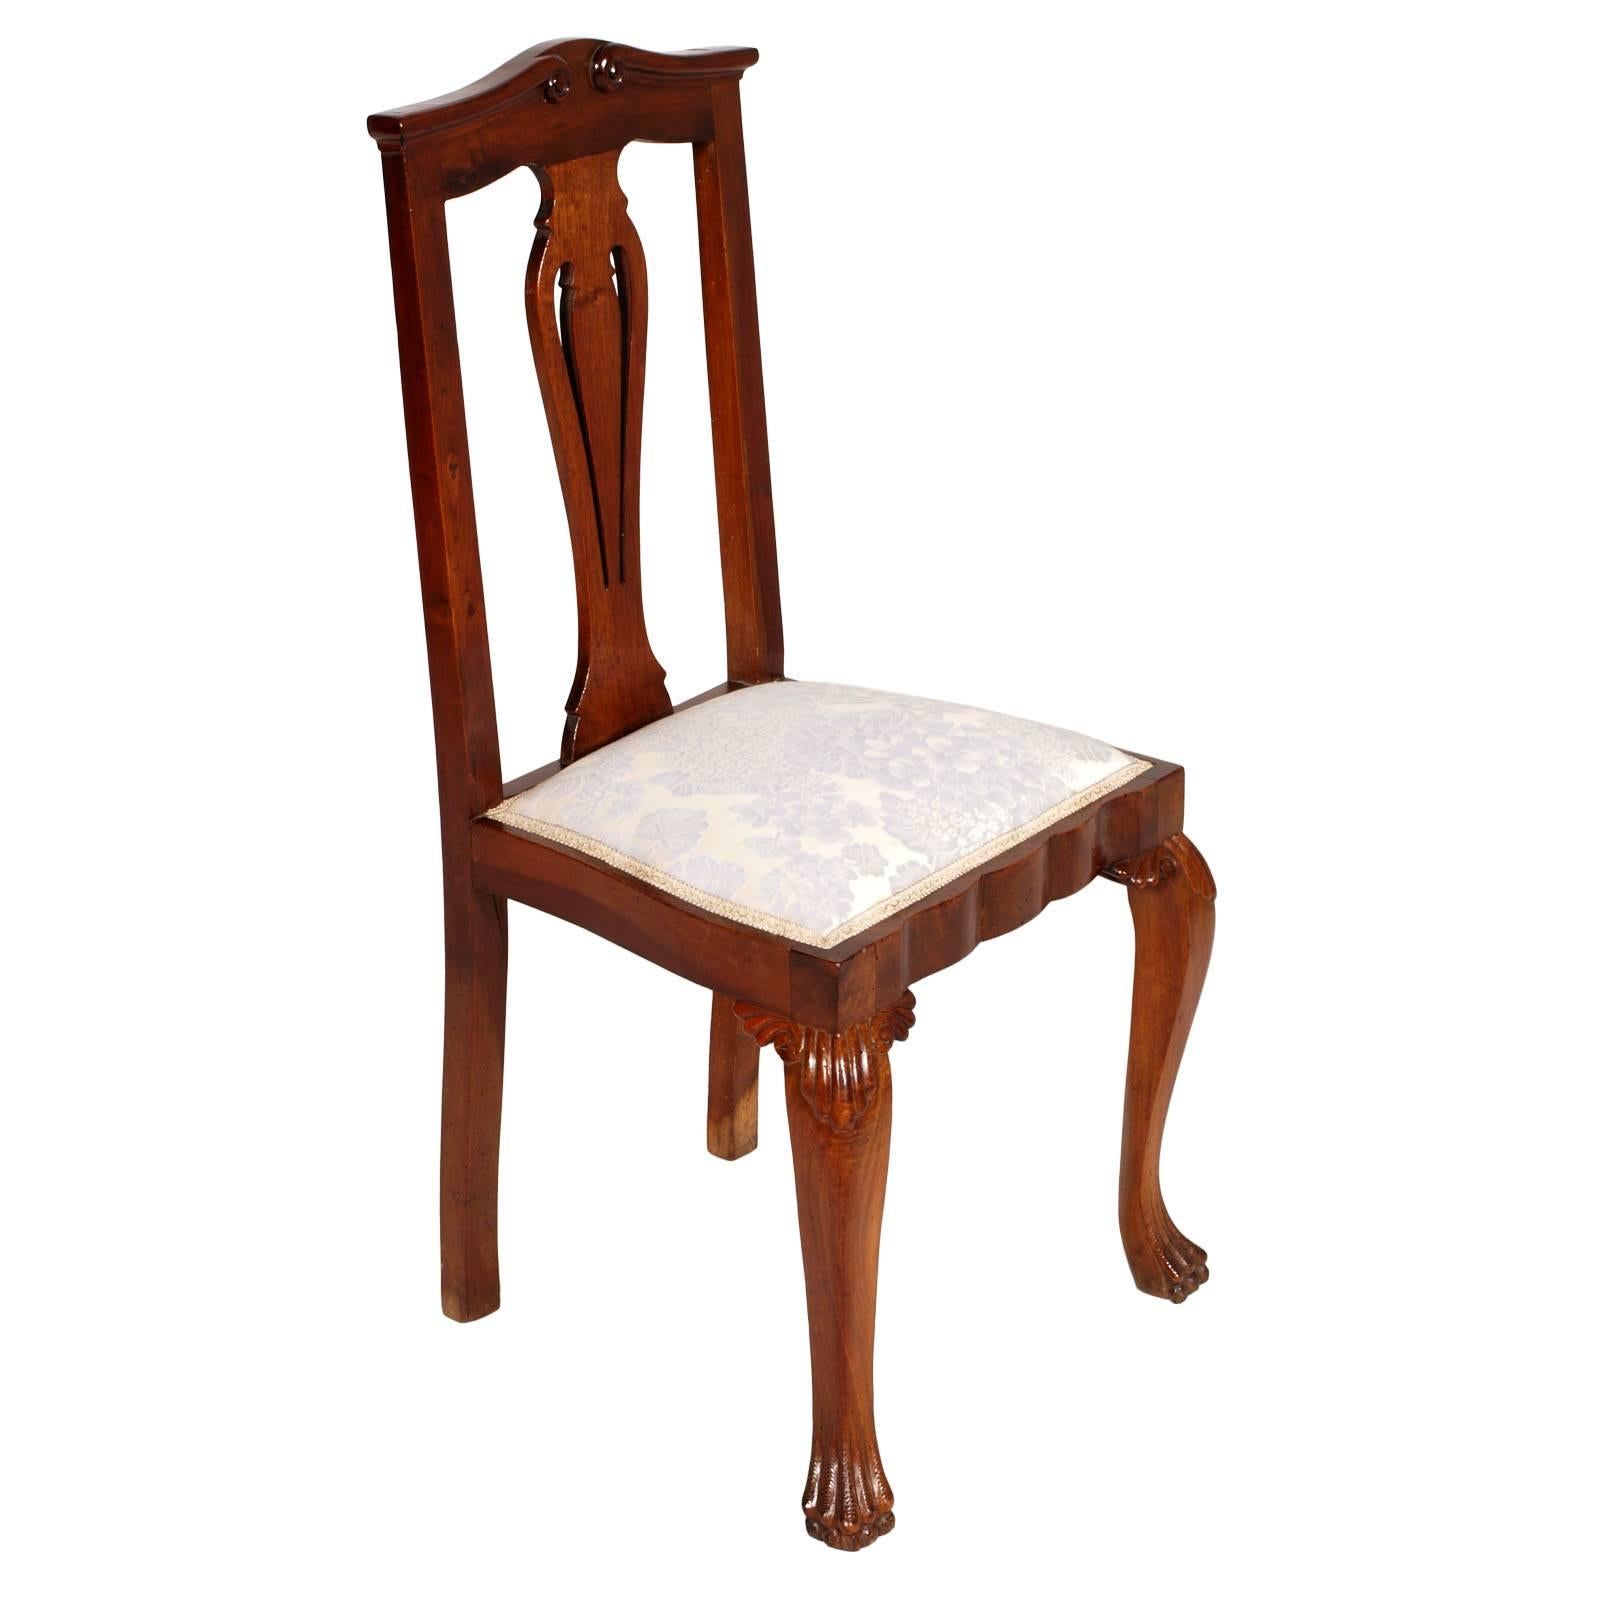 Italian set of six robust Chippendale Chairs , solid hand-carved walnut, restored and wax polished. The upholstery of the seat is still in good condition, usable, and can be redone on request, circa 1930.

Measures cm: H 50/100 x W 50 x D 46.